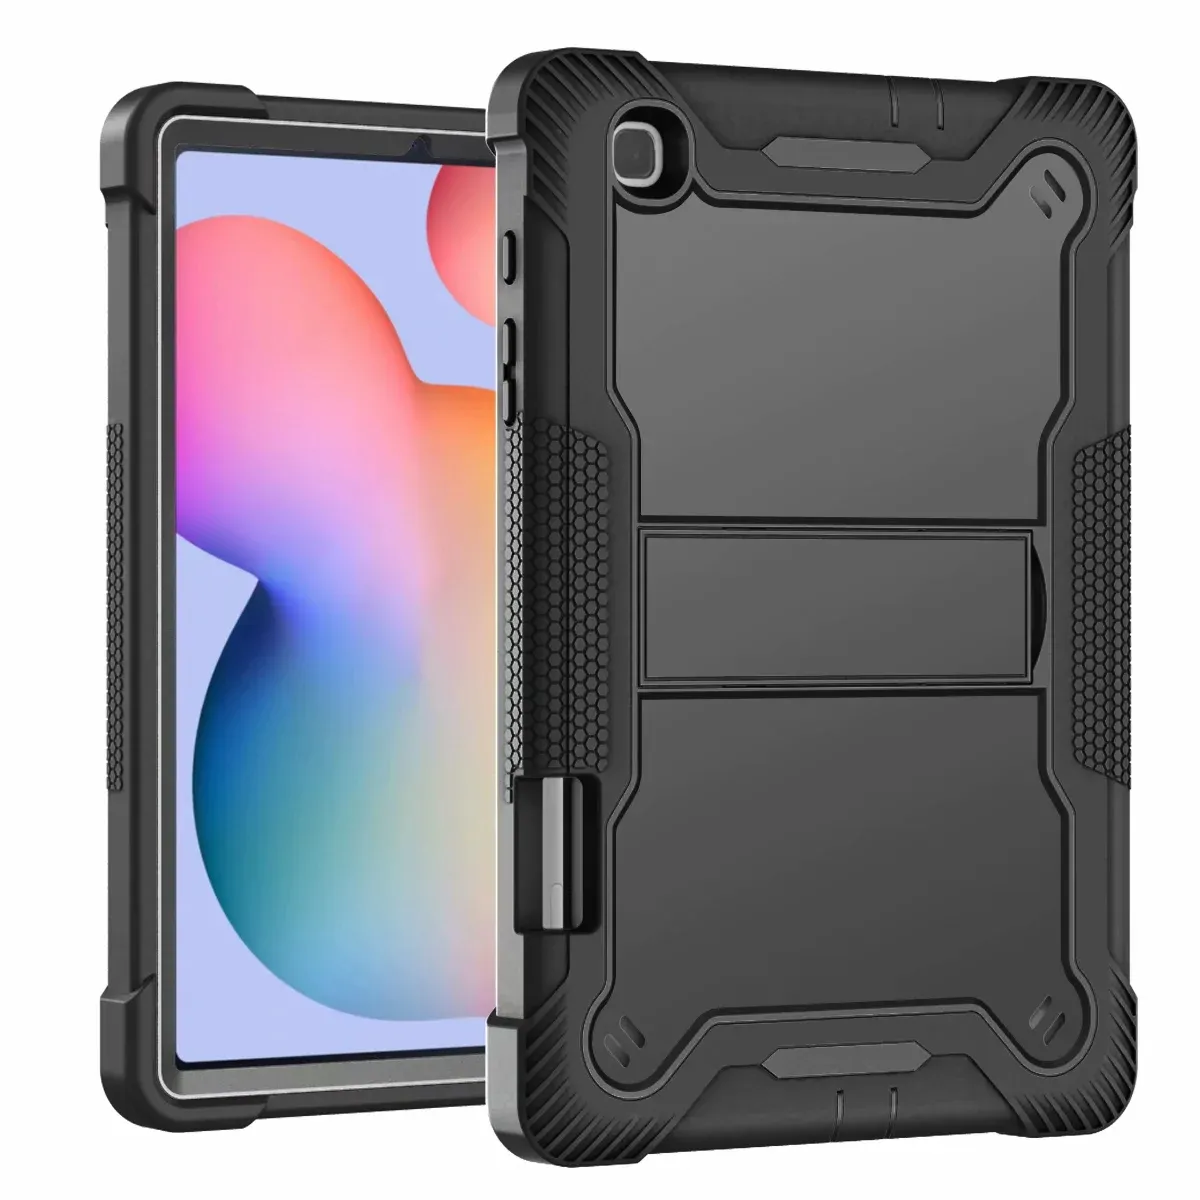 Defender Case for Samsung Galaxy Tab S6 Lite 10.4 inch P610 P615 with Kickstand Heavy Duty Shockproof Stand Tablet Cover